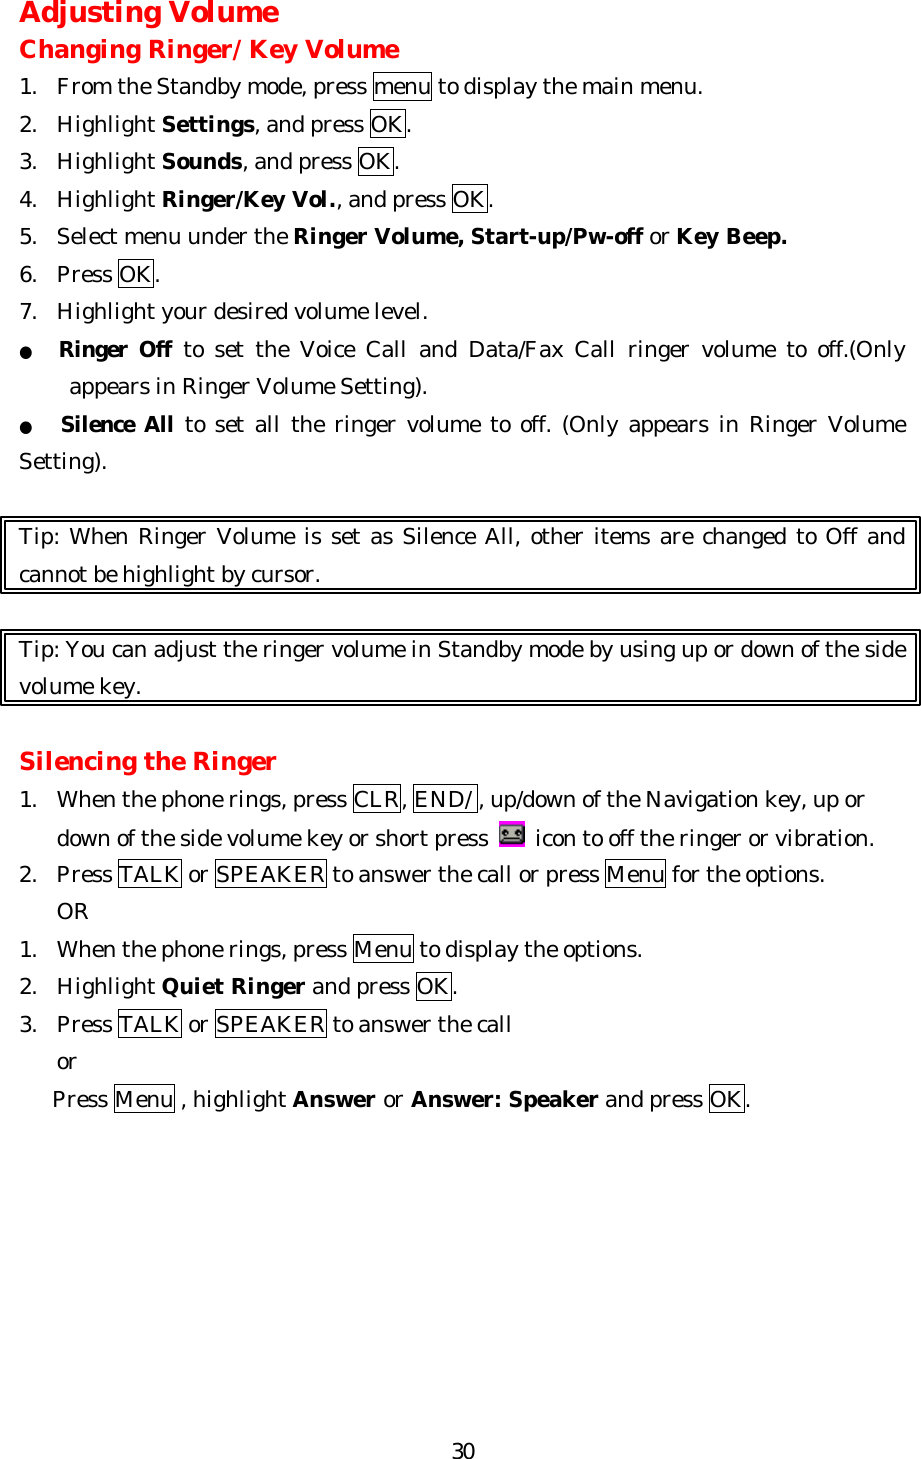   30Adjusting Volume Changing Ringer/ Key Volume 1. From the Standby mode, press menu to display the main menu. 2. Highlight Settings, and press OK. 3. Highlight Sounds, and press OK. 4. Highlight Ringer/Key Vol., and press OK.   5. Select menu under the Ringer Volume, Start-up/Pw-off or Key Beep. 6. Press OK. 7. Highlight your desired volume level. ● Ringer Off to set the Voice Call and Data/Fax Call ringer volume to off.(Only appears in Ringer Volume Setting). ●   Silence All to set all the ringer volume to off. (Only appears in Ringer Volume Setting).    Tip: When Ringer Volume is set as Silence All, other items are changed to Off and cannot be highlight by cursor.  Tip: You can adjust the ringer volume in Standby mode by using up or down of the side volume key.  Silencing the Ringer 1. When the phone rings, press CLR, END/ , up/down of the Navigation key, up or down of the side volume key or short press   icon to off the ringer or vibration. 2. Press TALK or SPEAKER to answer the call or press Menu for the options. OR 1. When the phone rings, press Menu to display the options. 2. Highlight Quiet Ringer and press OK. 3. Press TALK or SPEAKER to answer the call   or    Press Menu , highlight Answer or Answer: Speaker and press OK.         